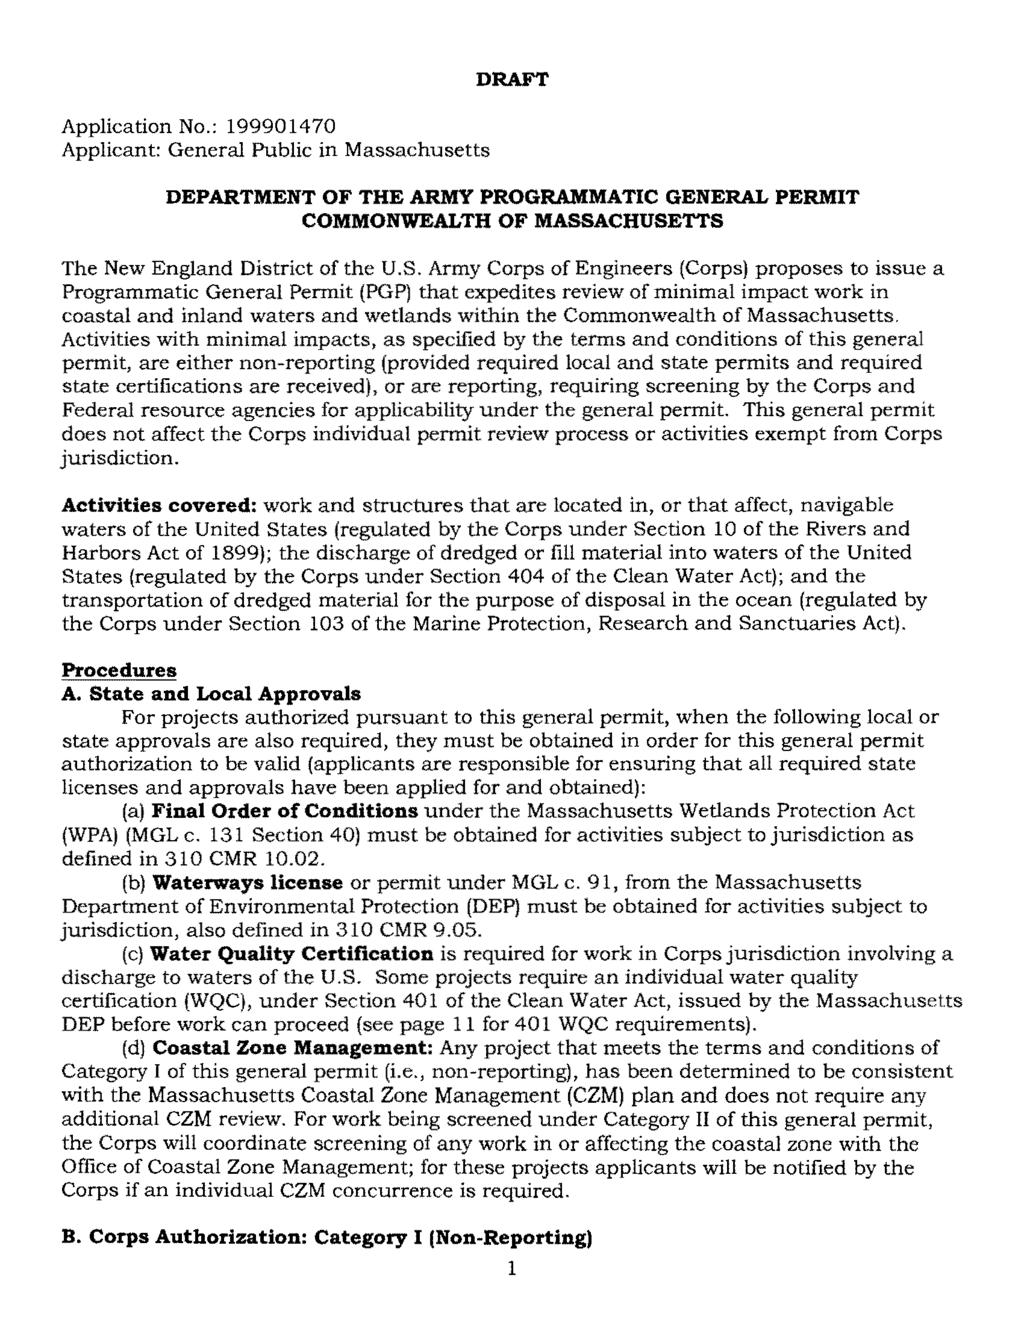 Application No.: 199901470 Applicant: General Public in Massachusetts DRAFT DEPARTMENT OF THE ARMY PROGRAMMATIC GENERAL PERMIT COMMONWEALTH OF MASS